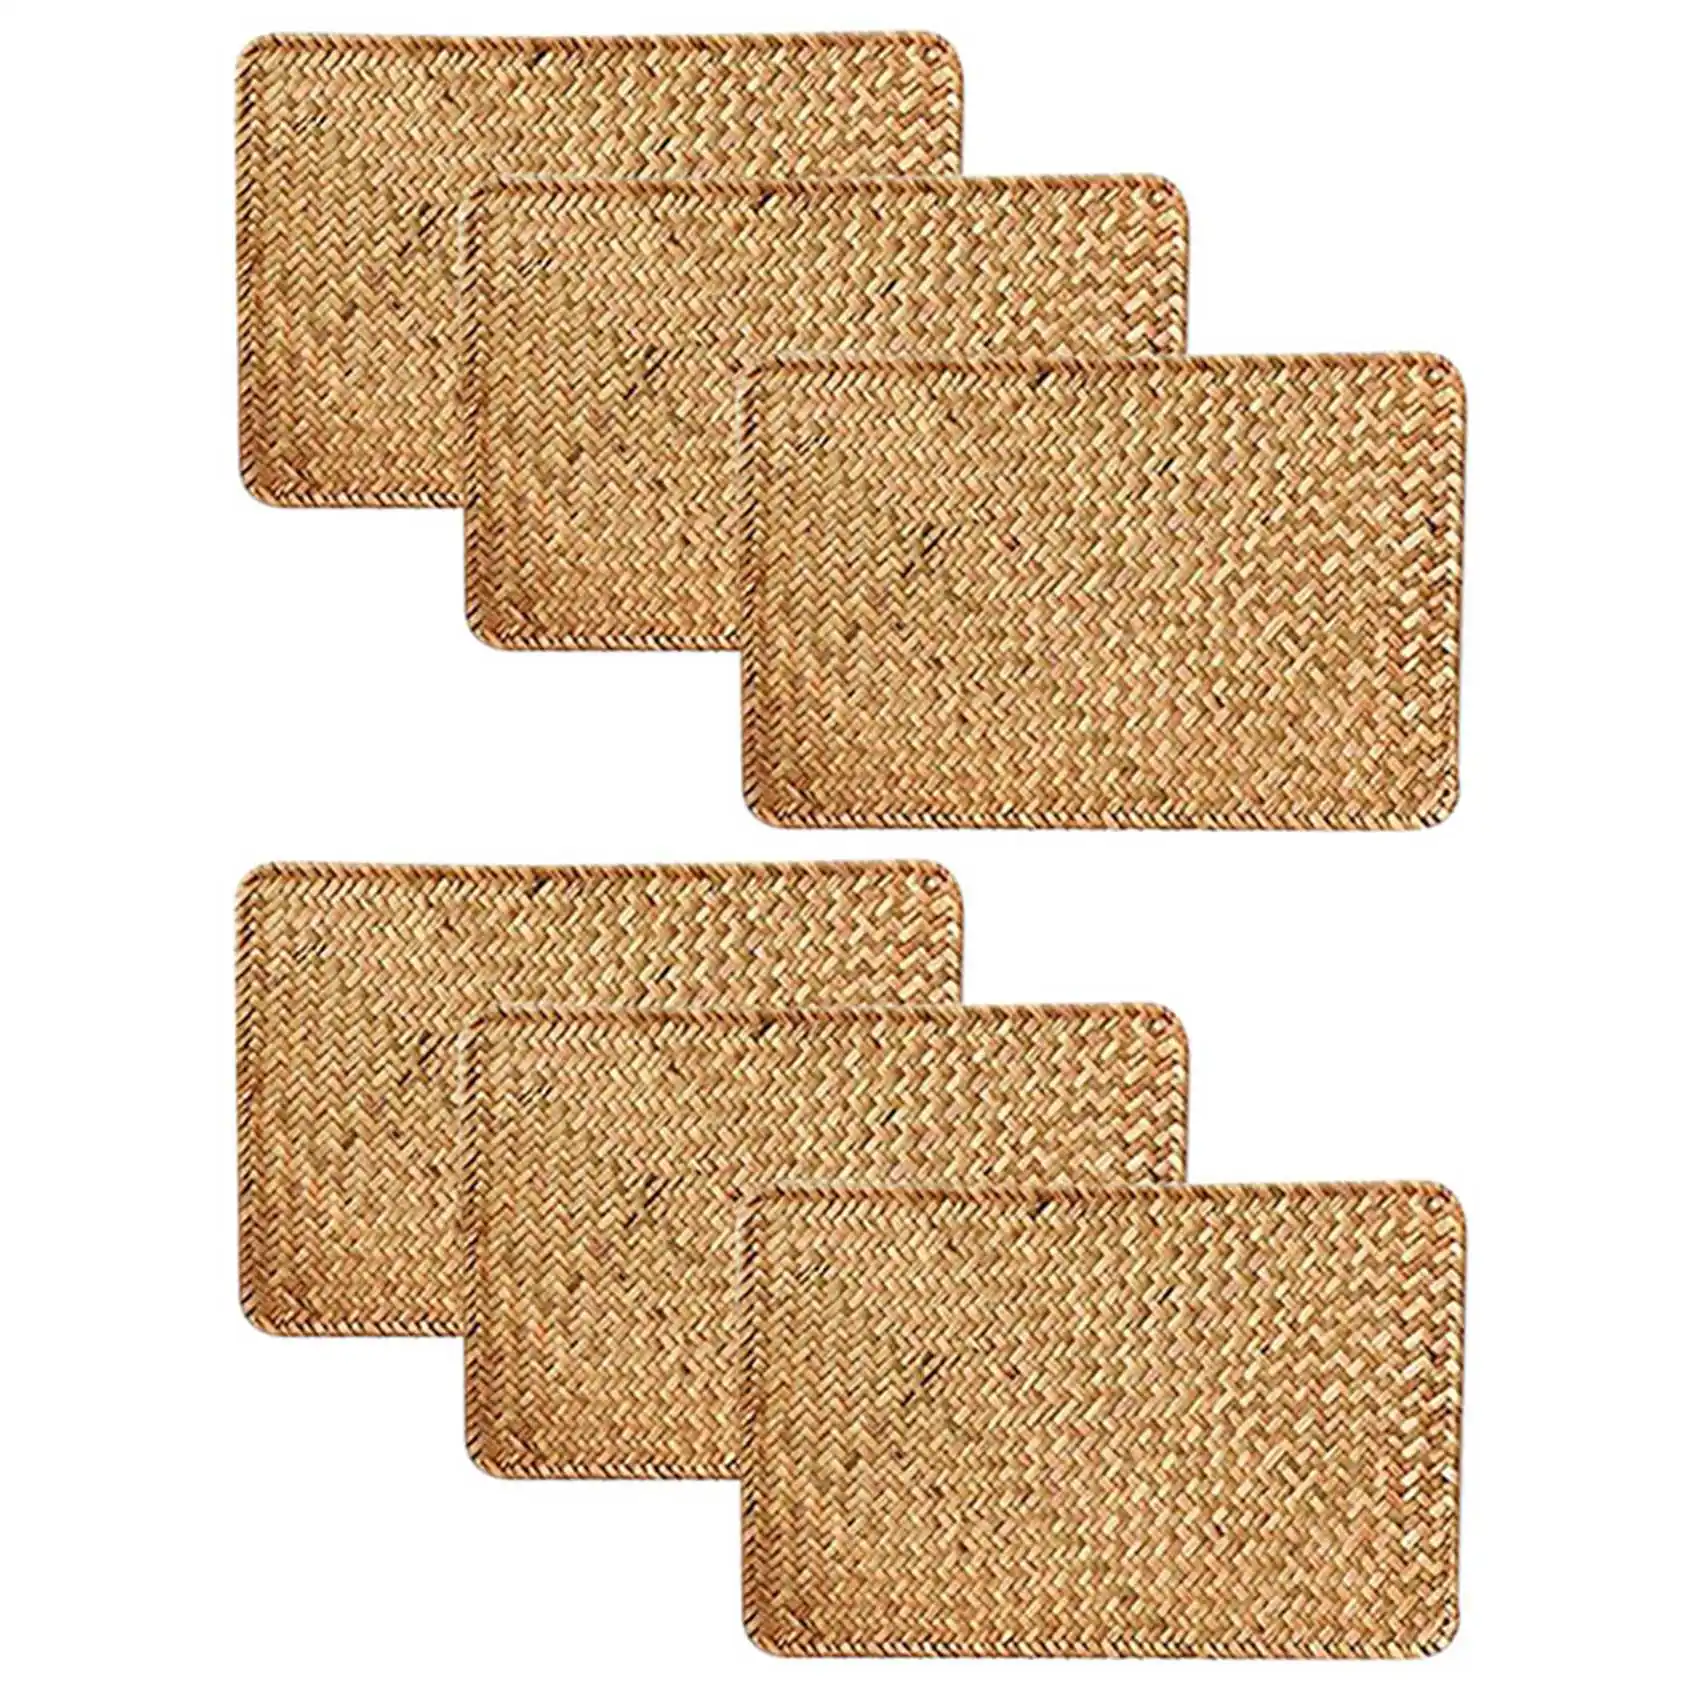 

Pack of 6 Natural Seagrass Place Mat 17.7inch x 12inch Hand-Woven Rectangular Rattan Placemats